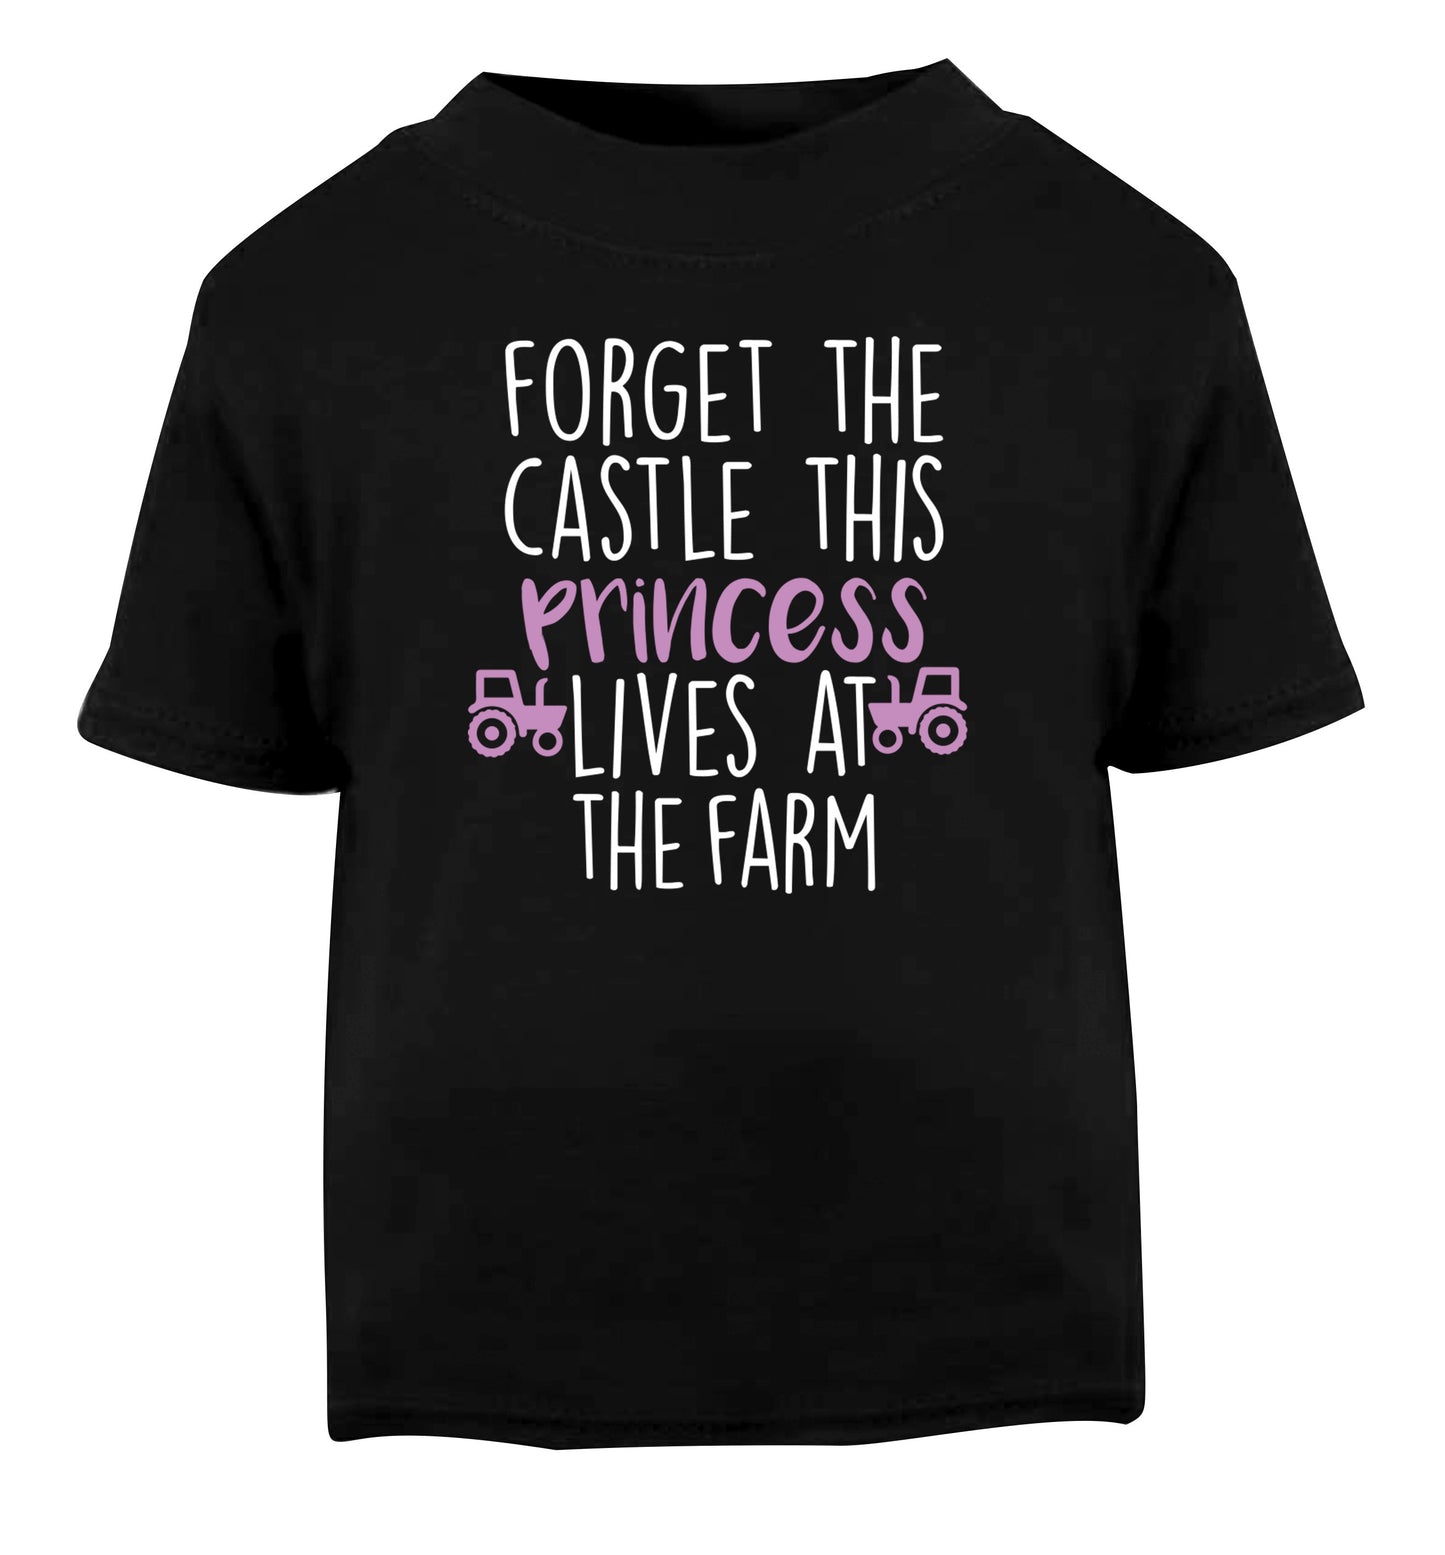 Forget the castle this princess lives at the farm Black Baby Toddler Tshirt 2 years